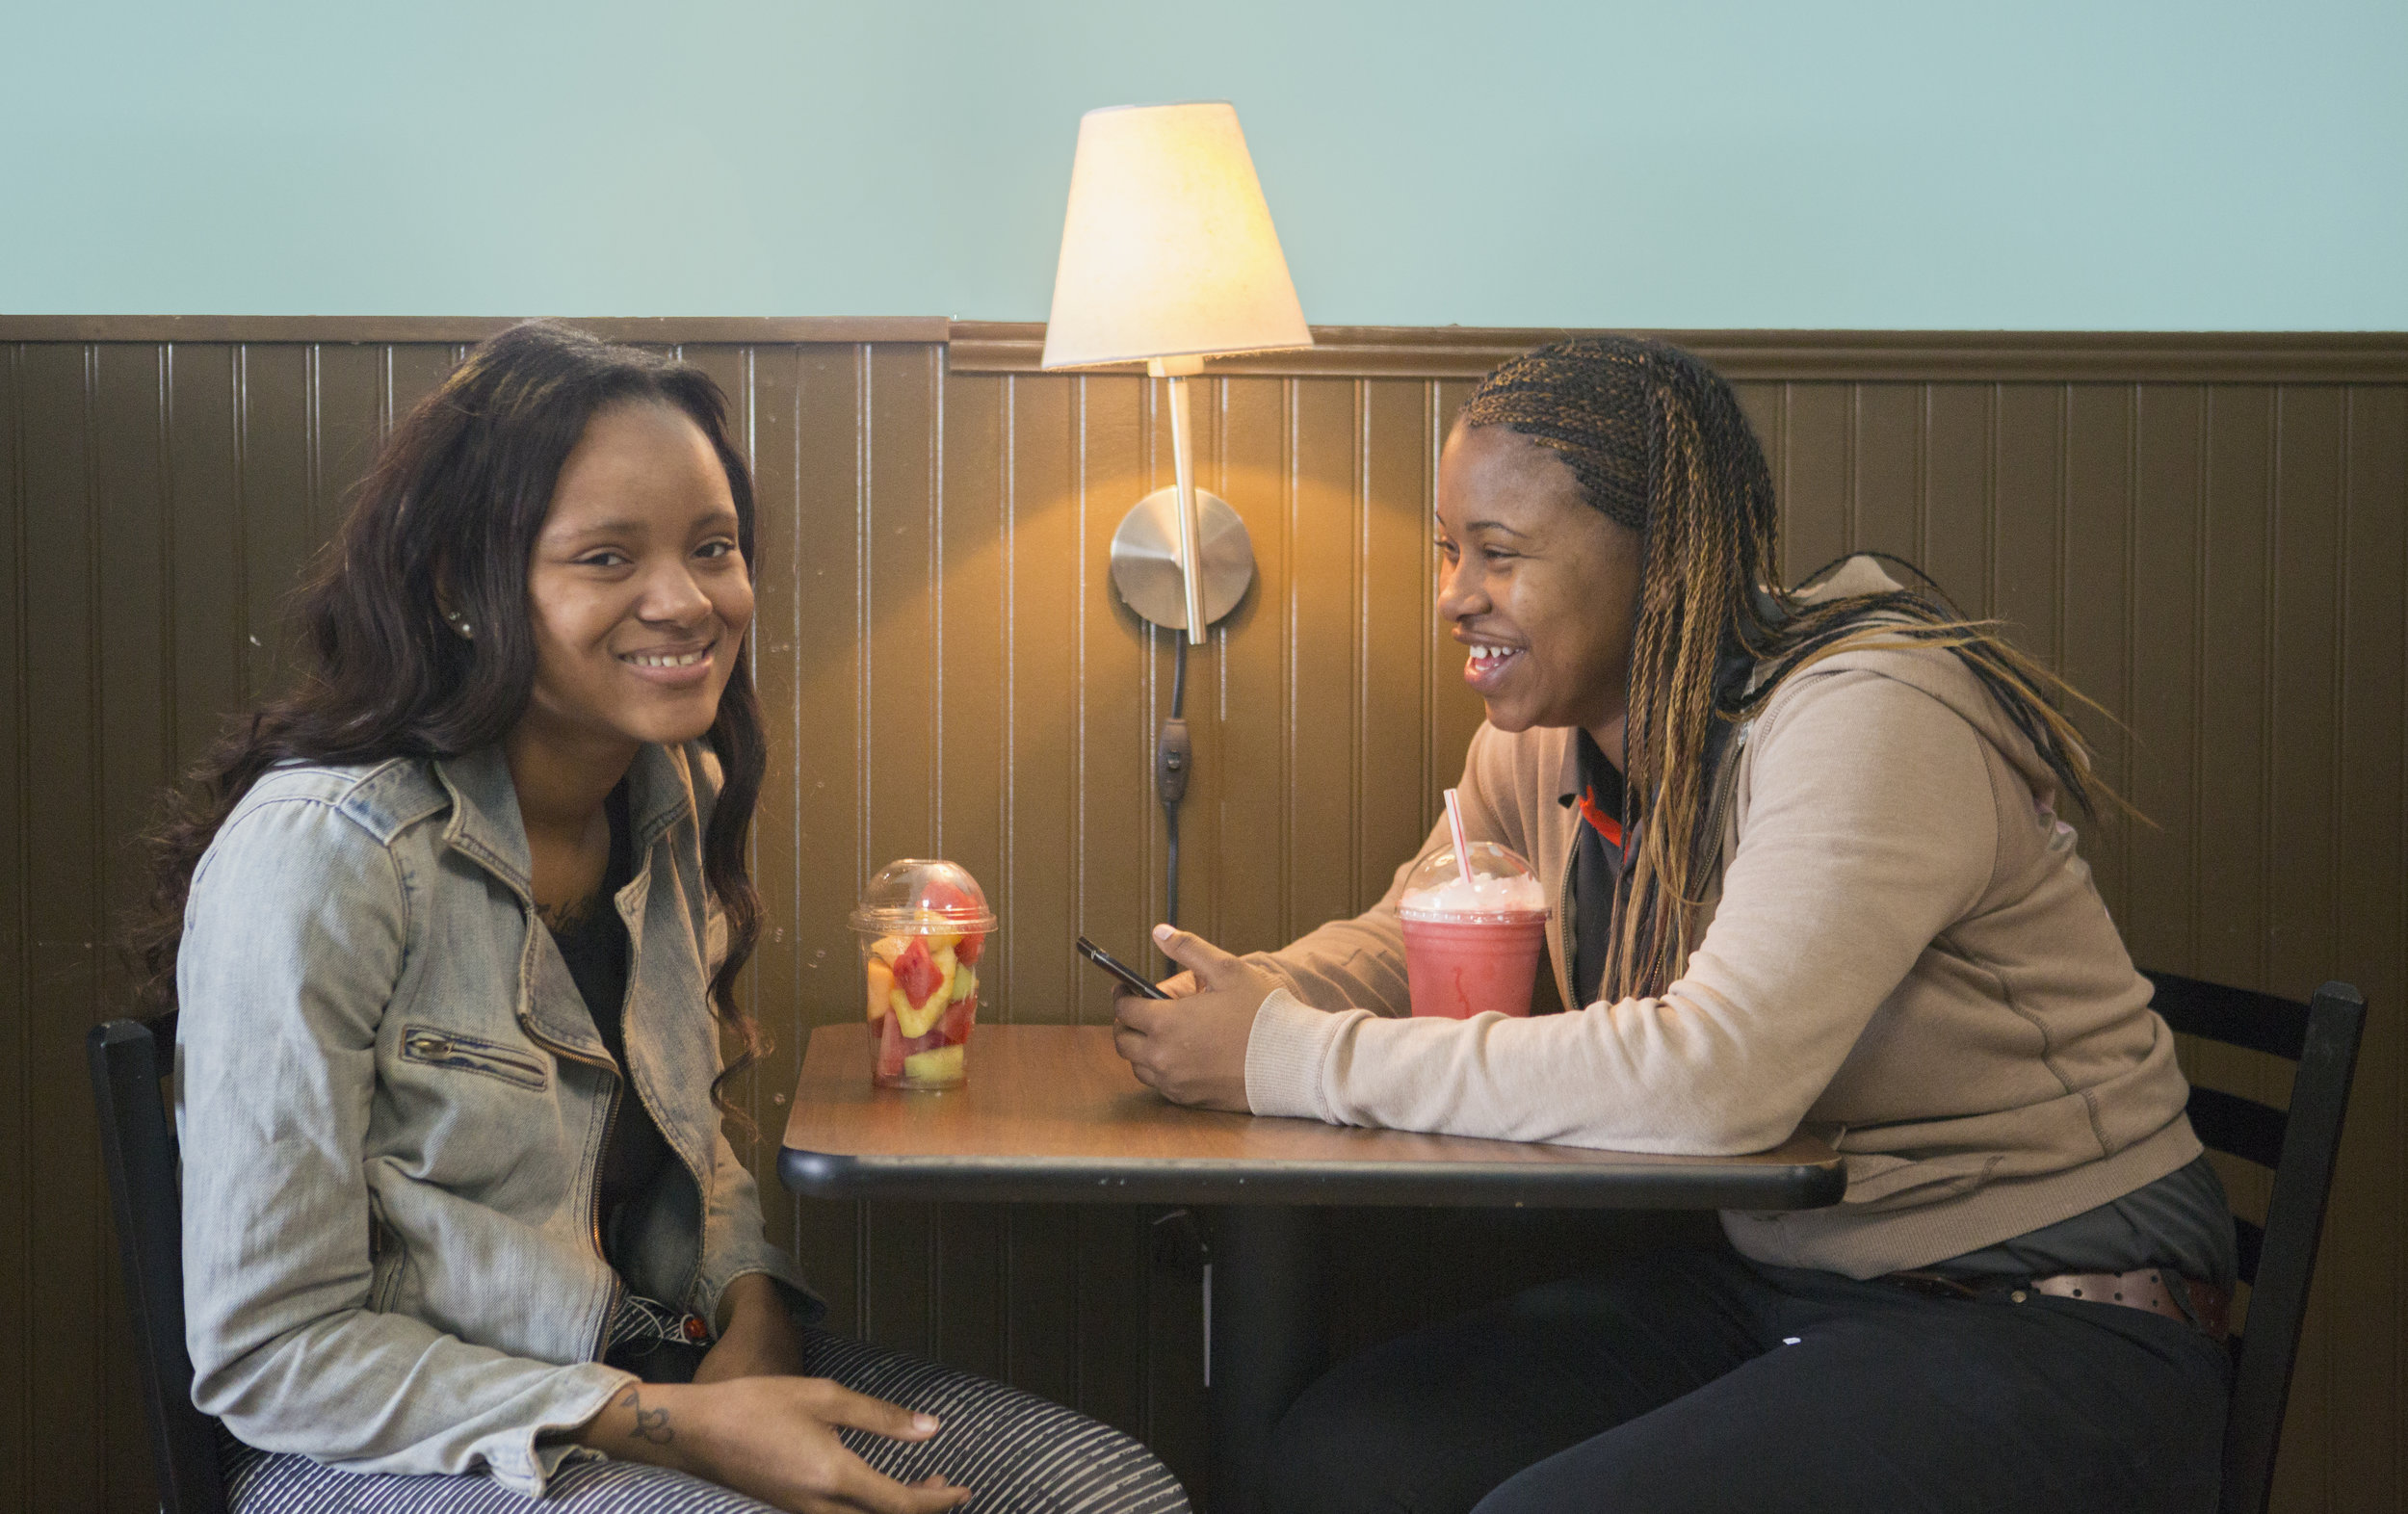 Two young ladies enjoy conversation over food and drink at Community Grounds.